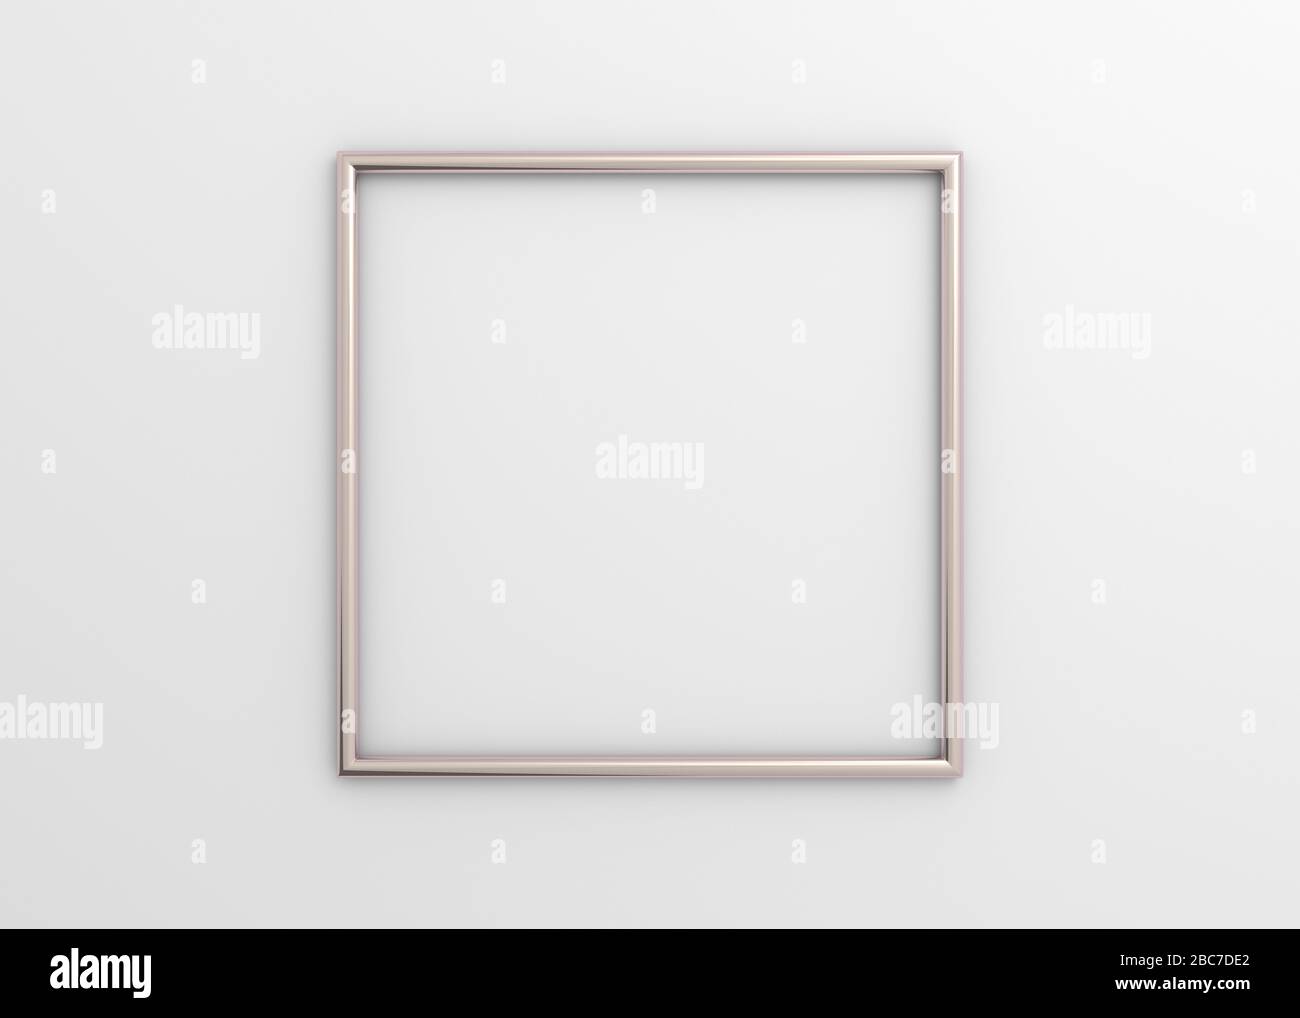 Abstract 3d rendering of square shape. Modern geometric background design Stock Photo